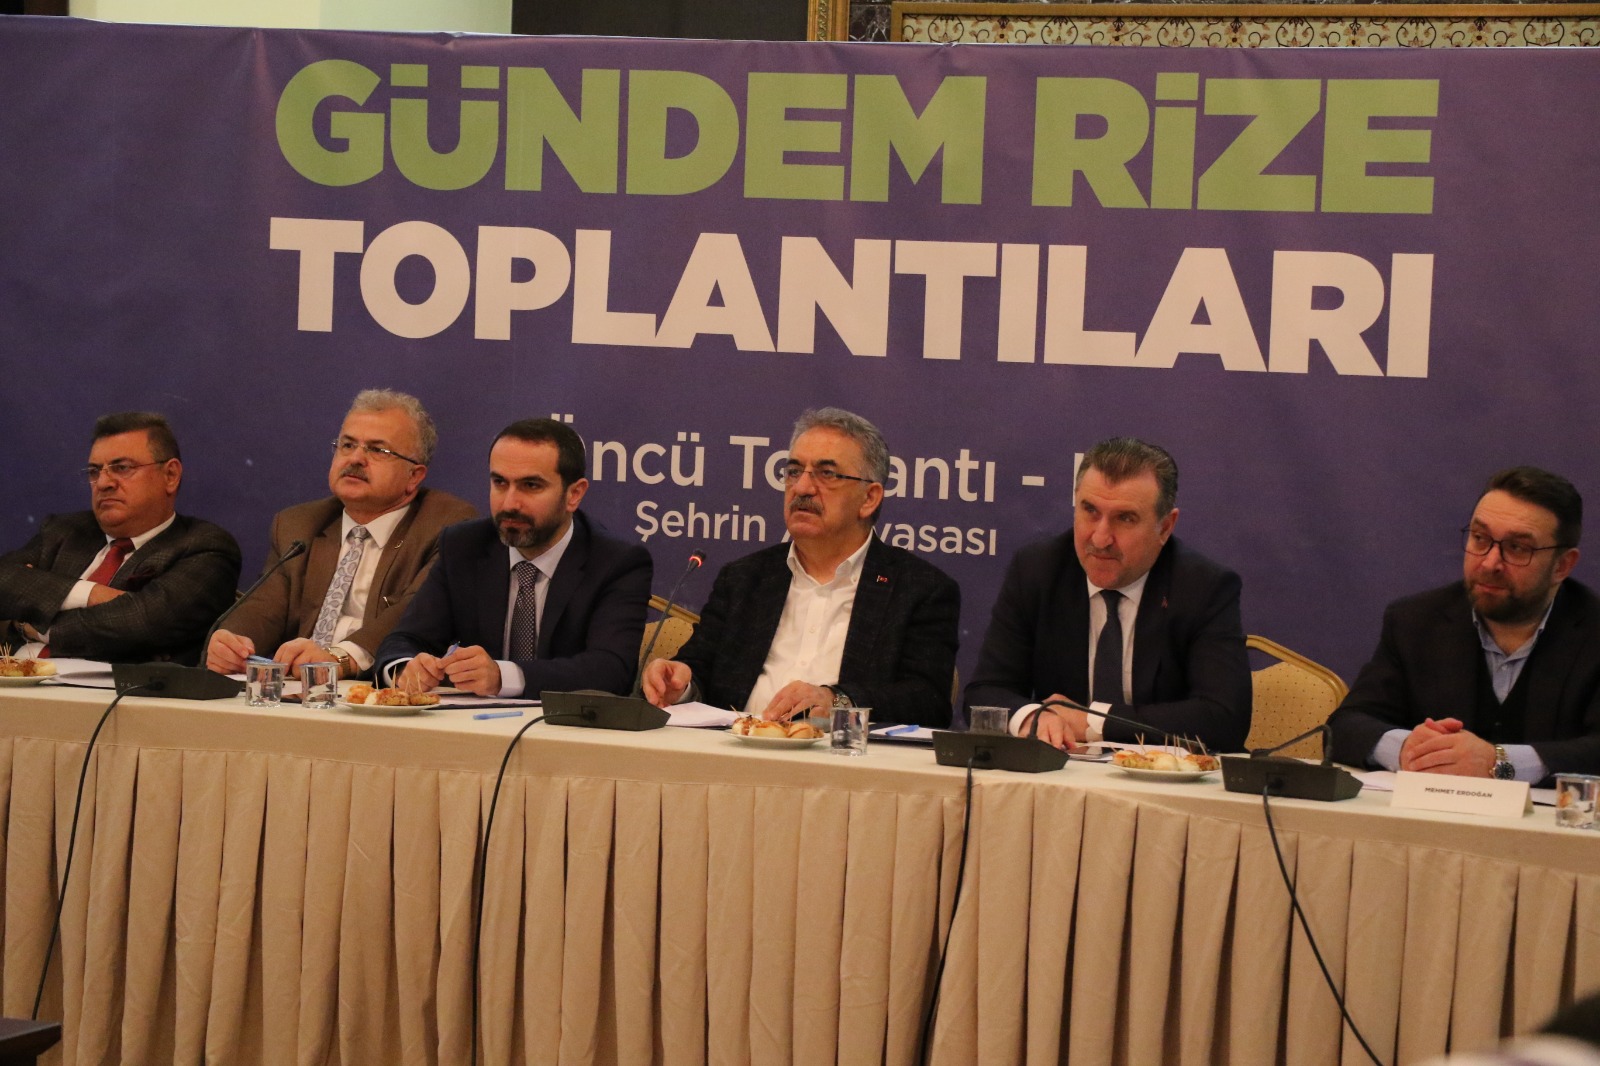 Rize de gündem değerlendirildi